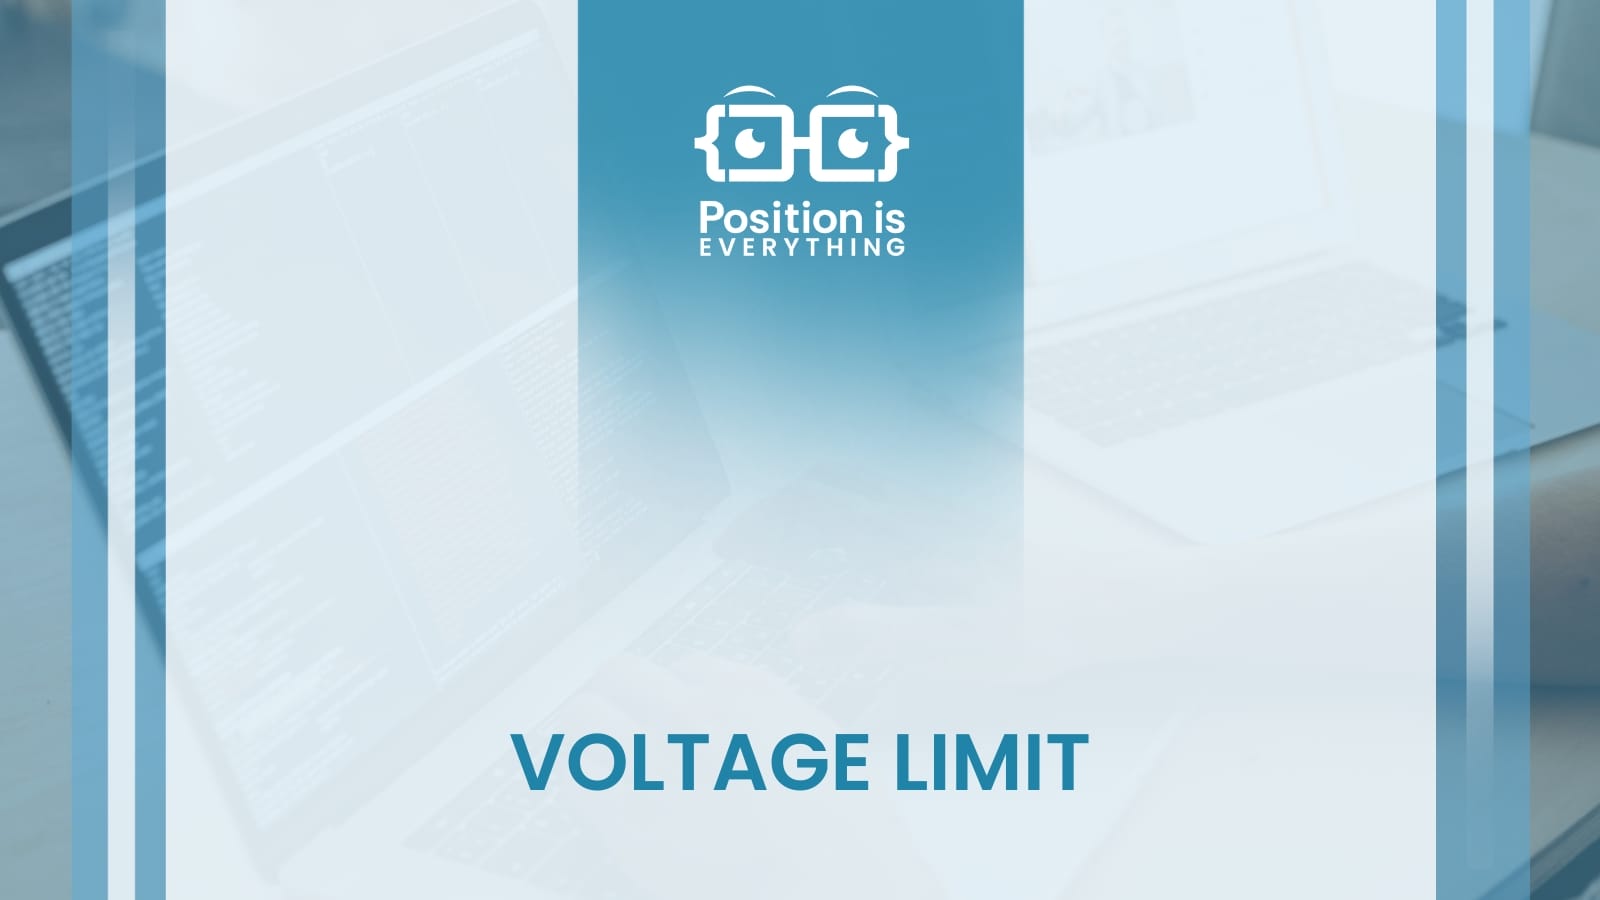 Voltage Limit: What Is Warning Trying Tell You?